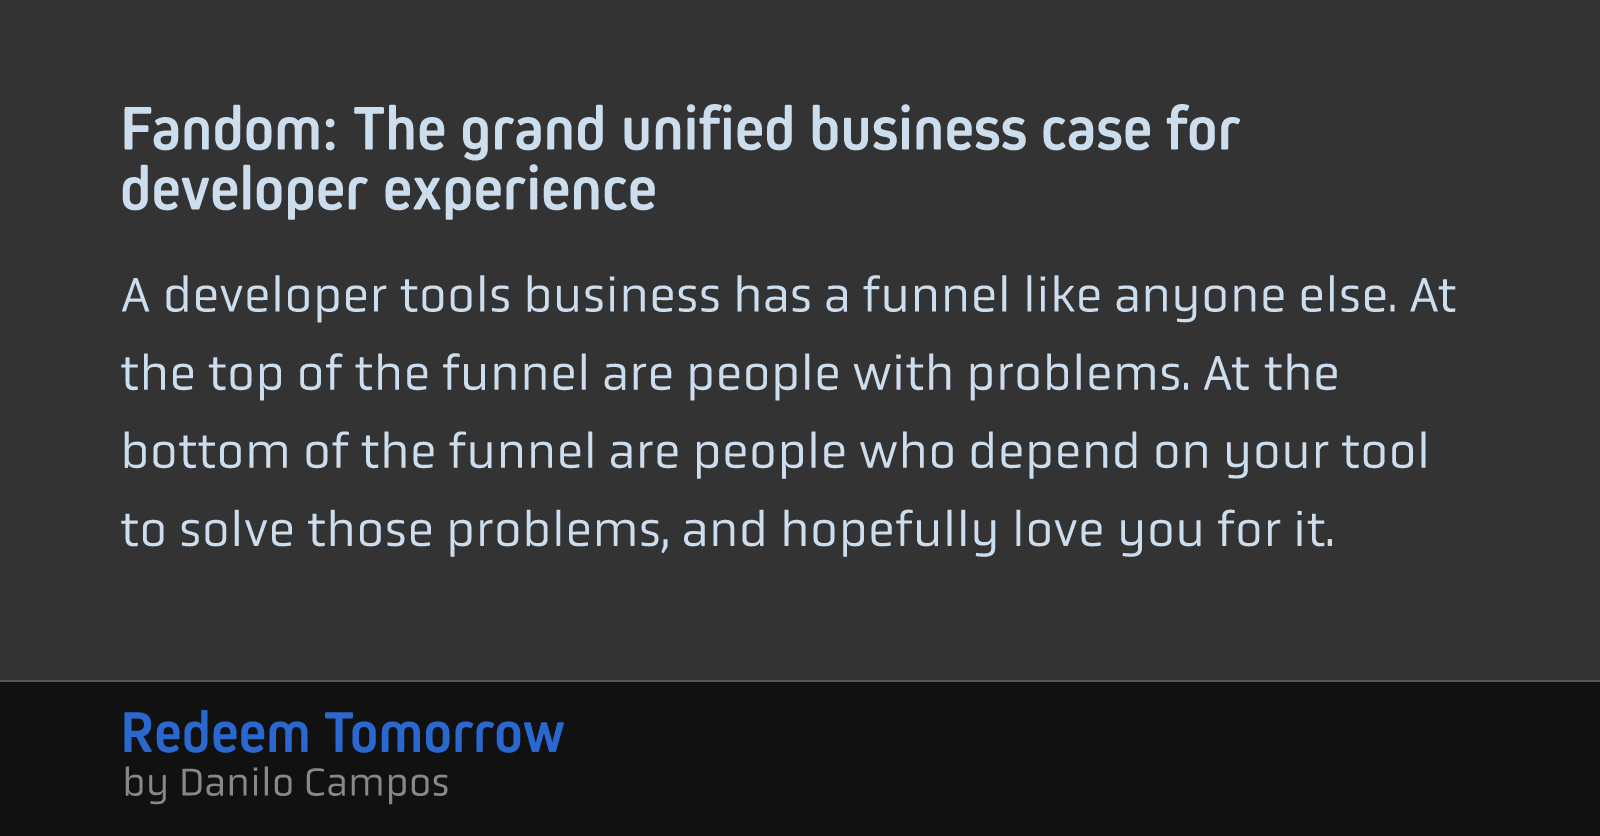 Fandom: The grand unified business case for developer experience